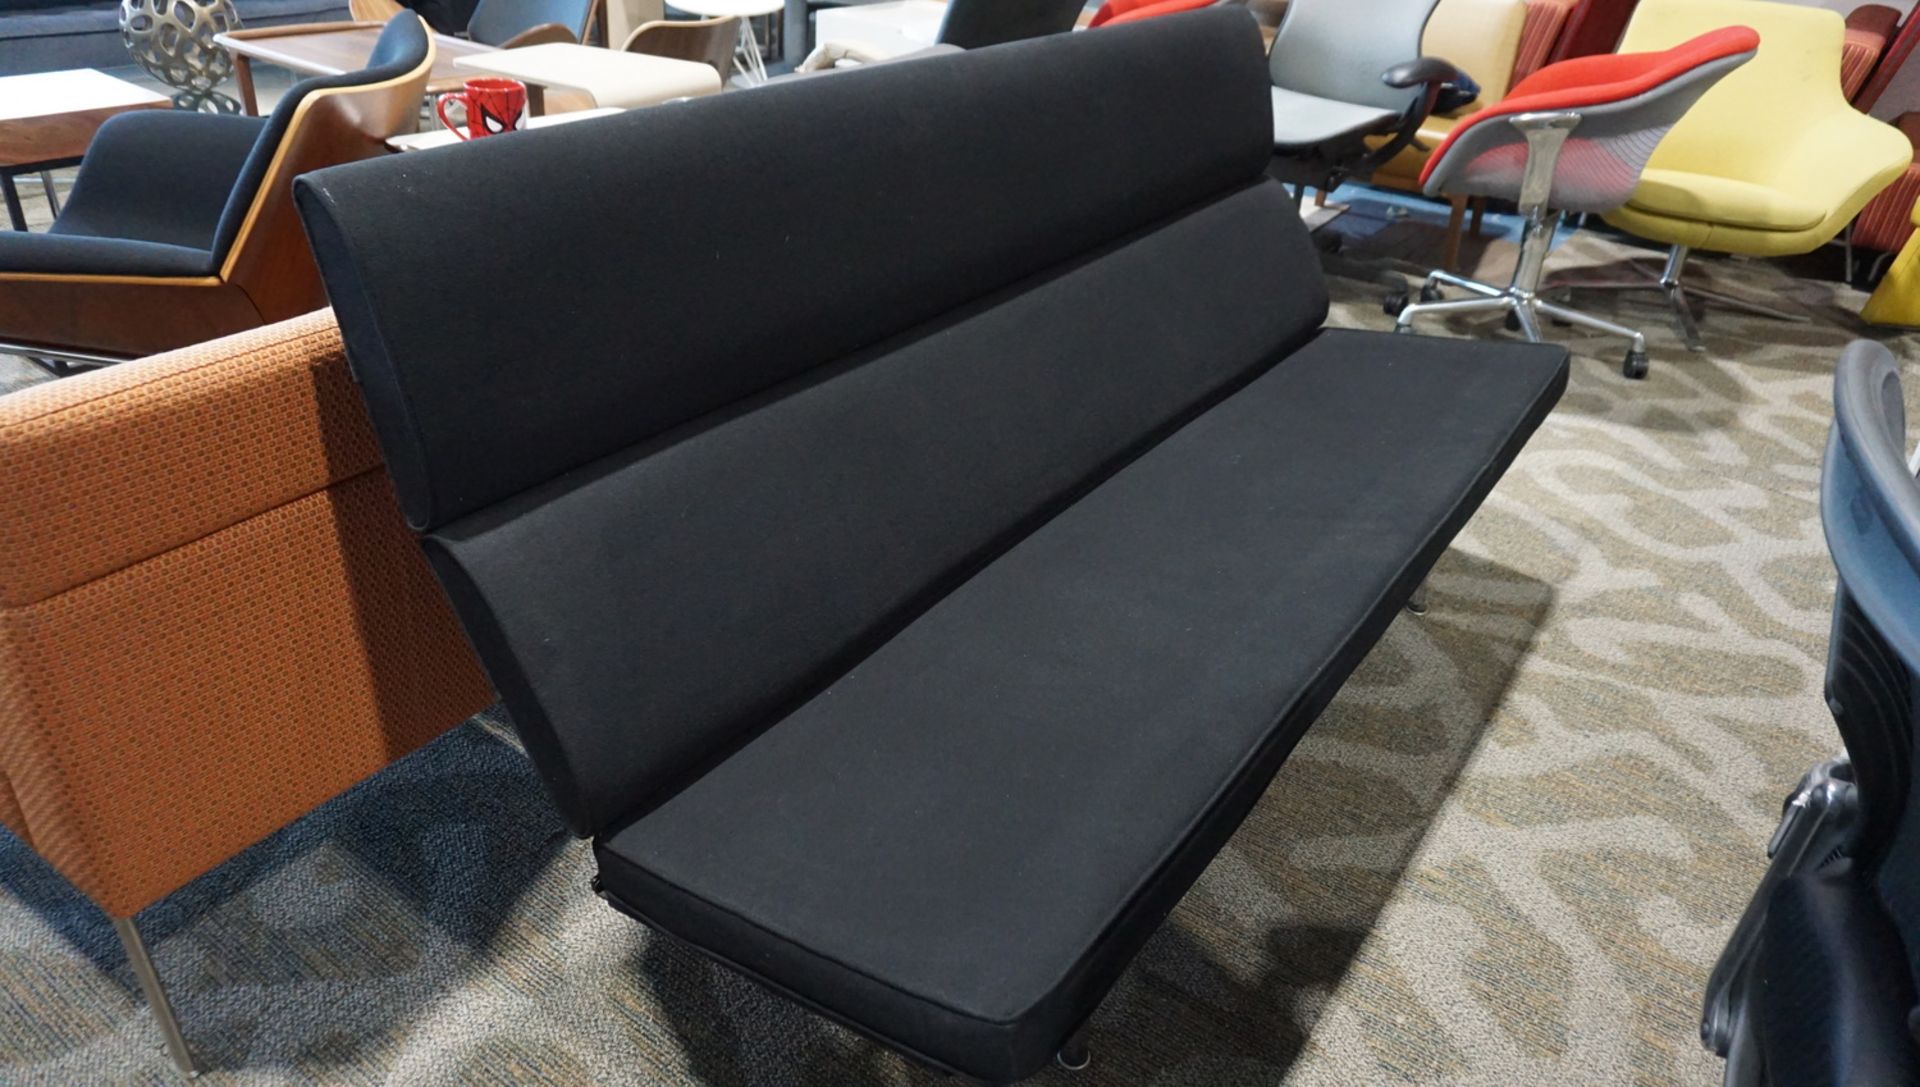 HERMAN MILL EAMES BLACK UPHOLSTERED ARMLESS SOFA ($5,600 MSRP) - Image 3 of 3